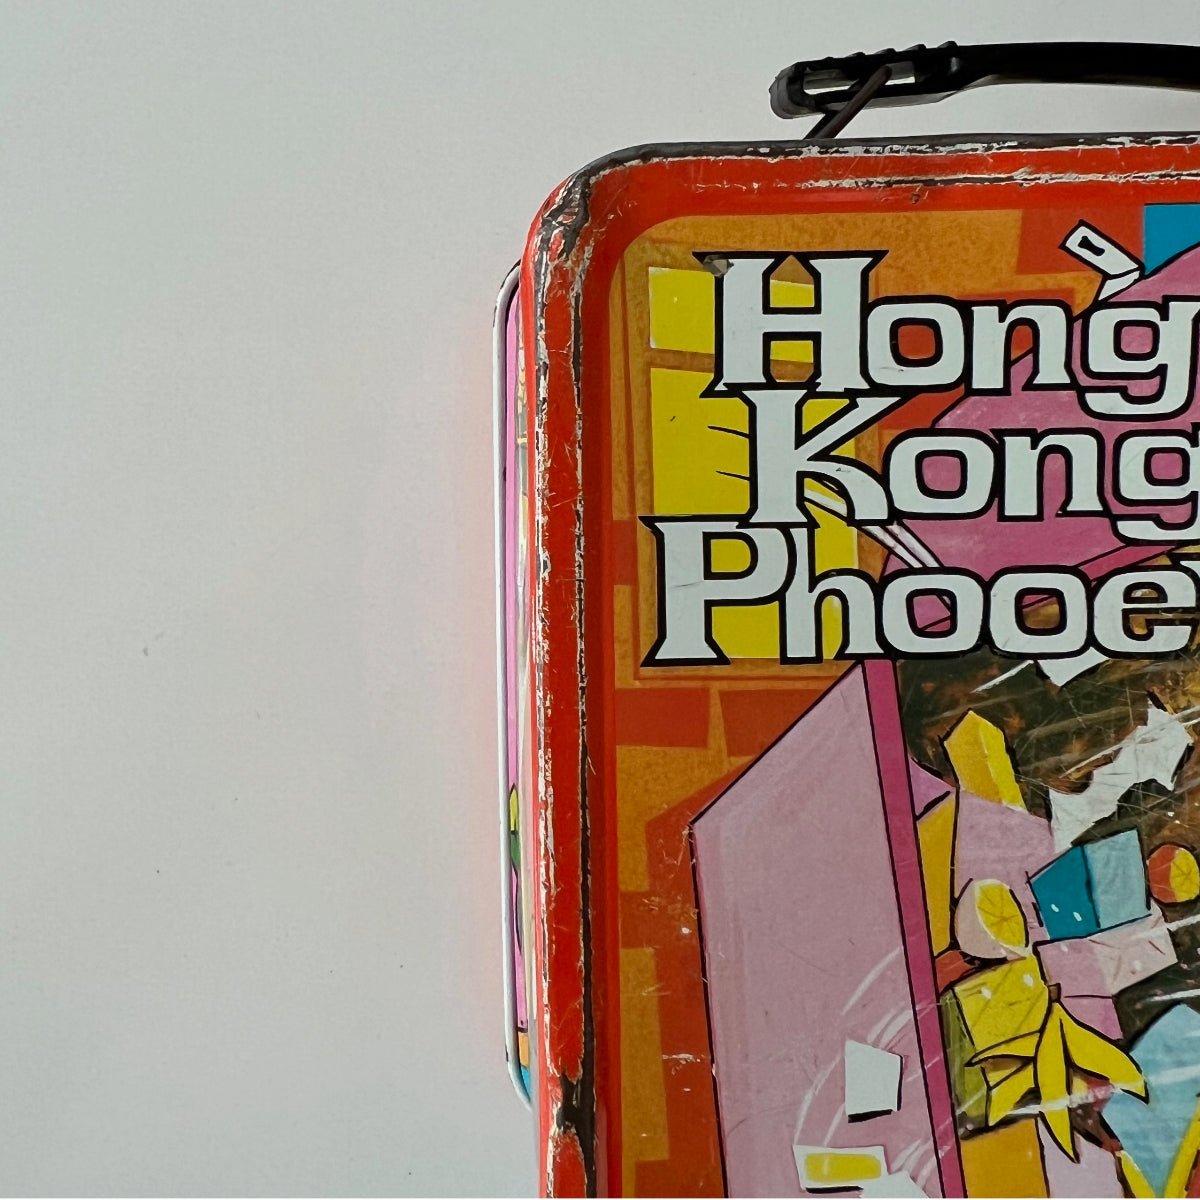 Vintage 1975 Hong Kong Phoochy Lunch Box With Thermos